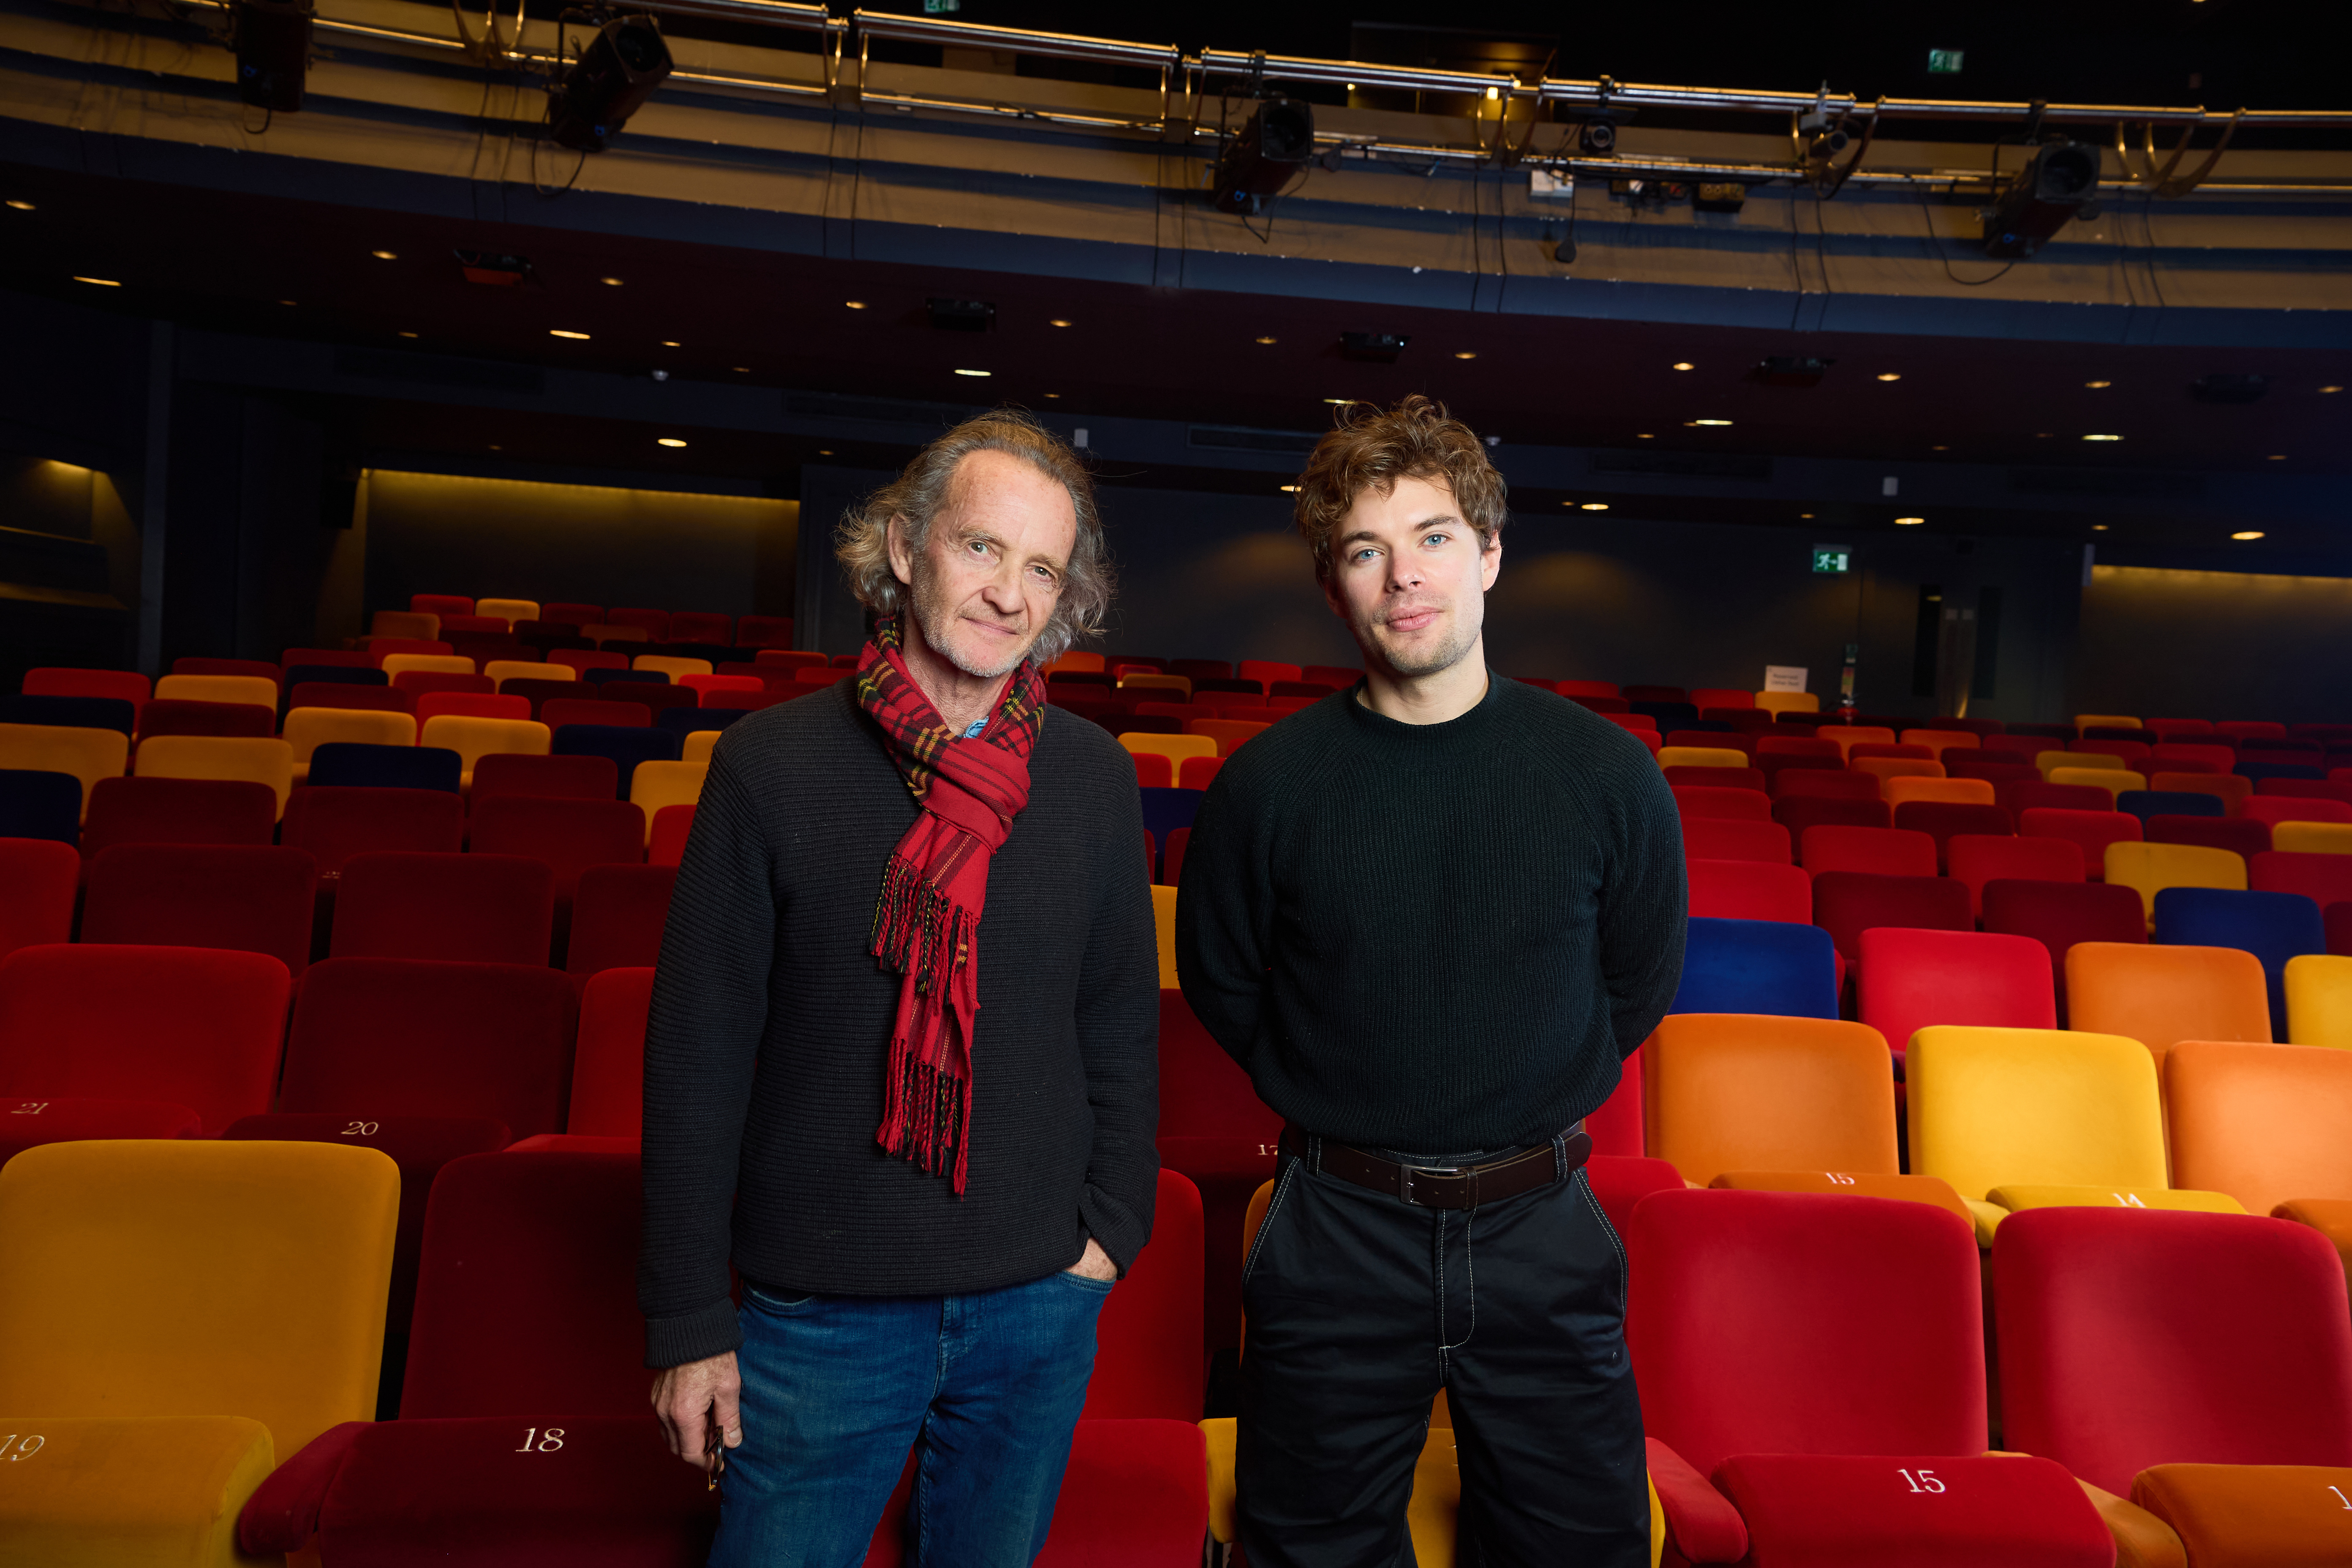 Anton Lesser and Charlie Hamblett stood amongst the seating of the Oxford Playhouse auditorium